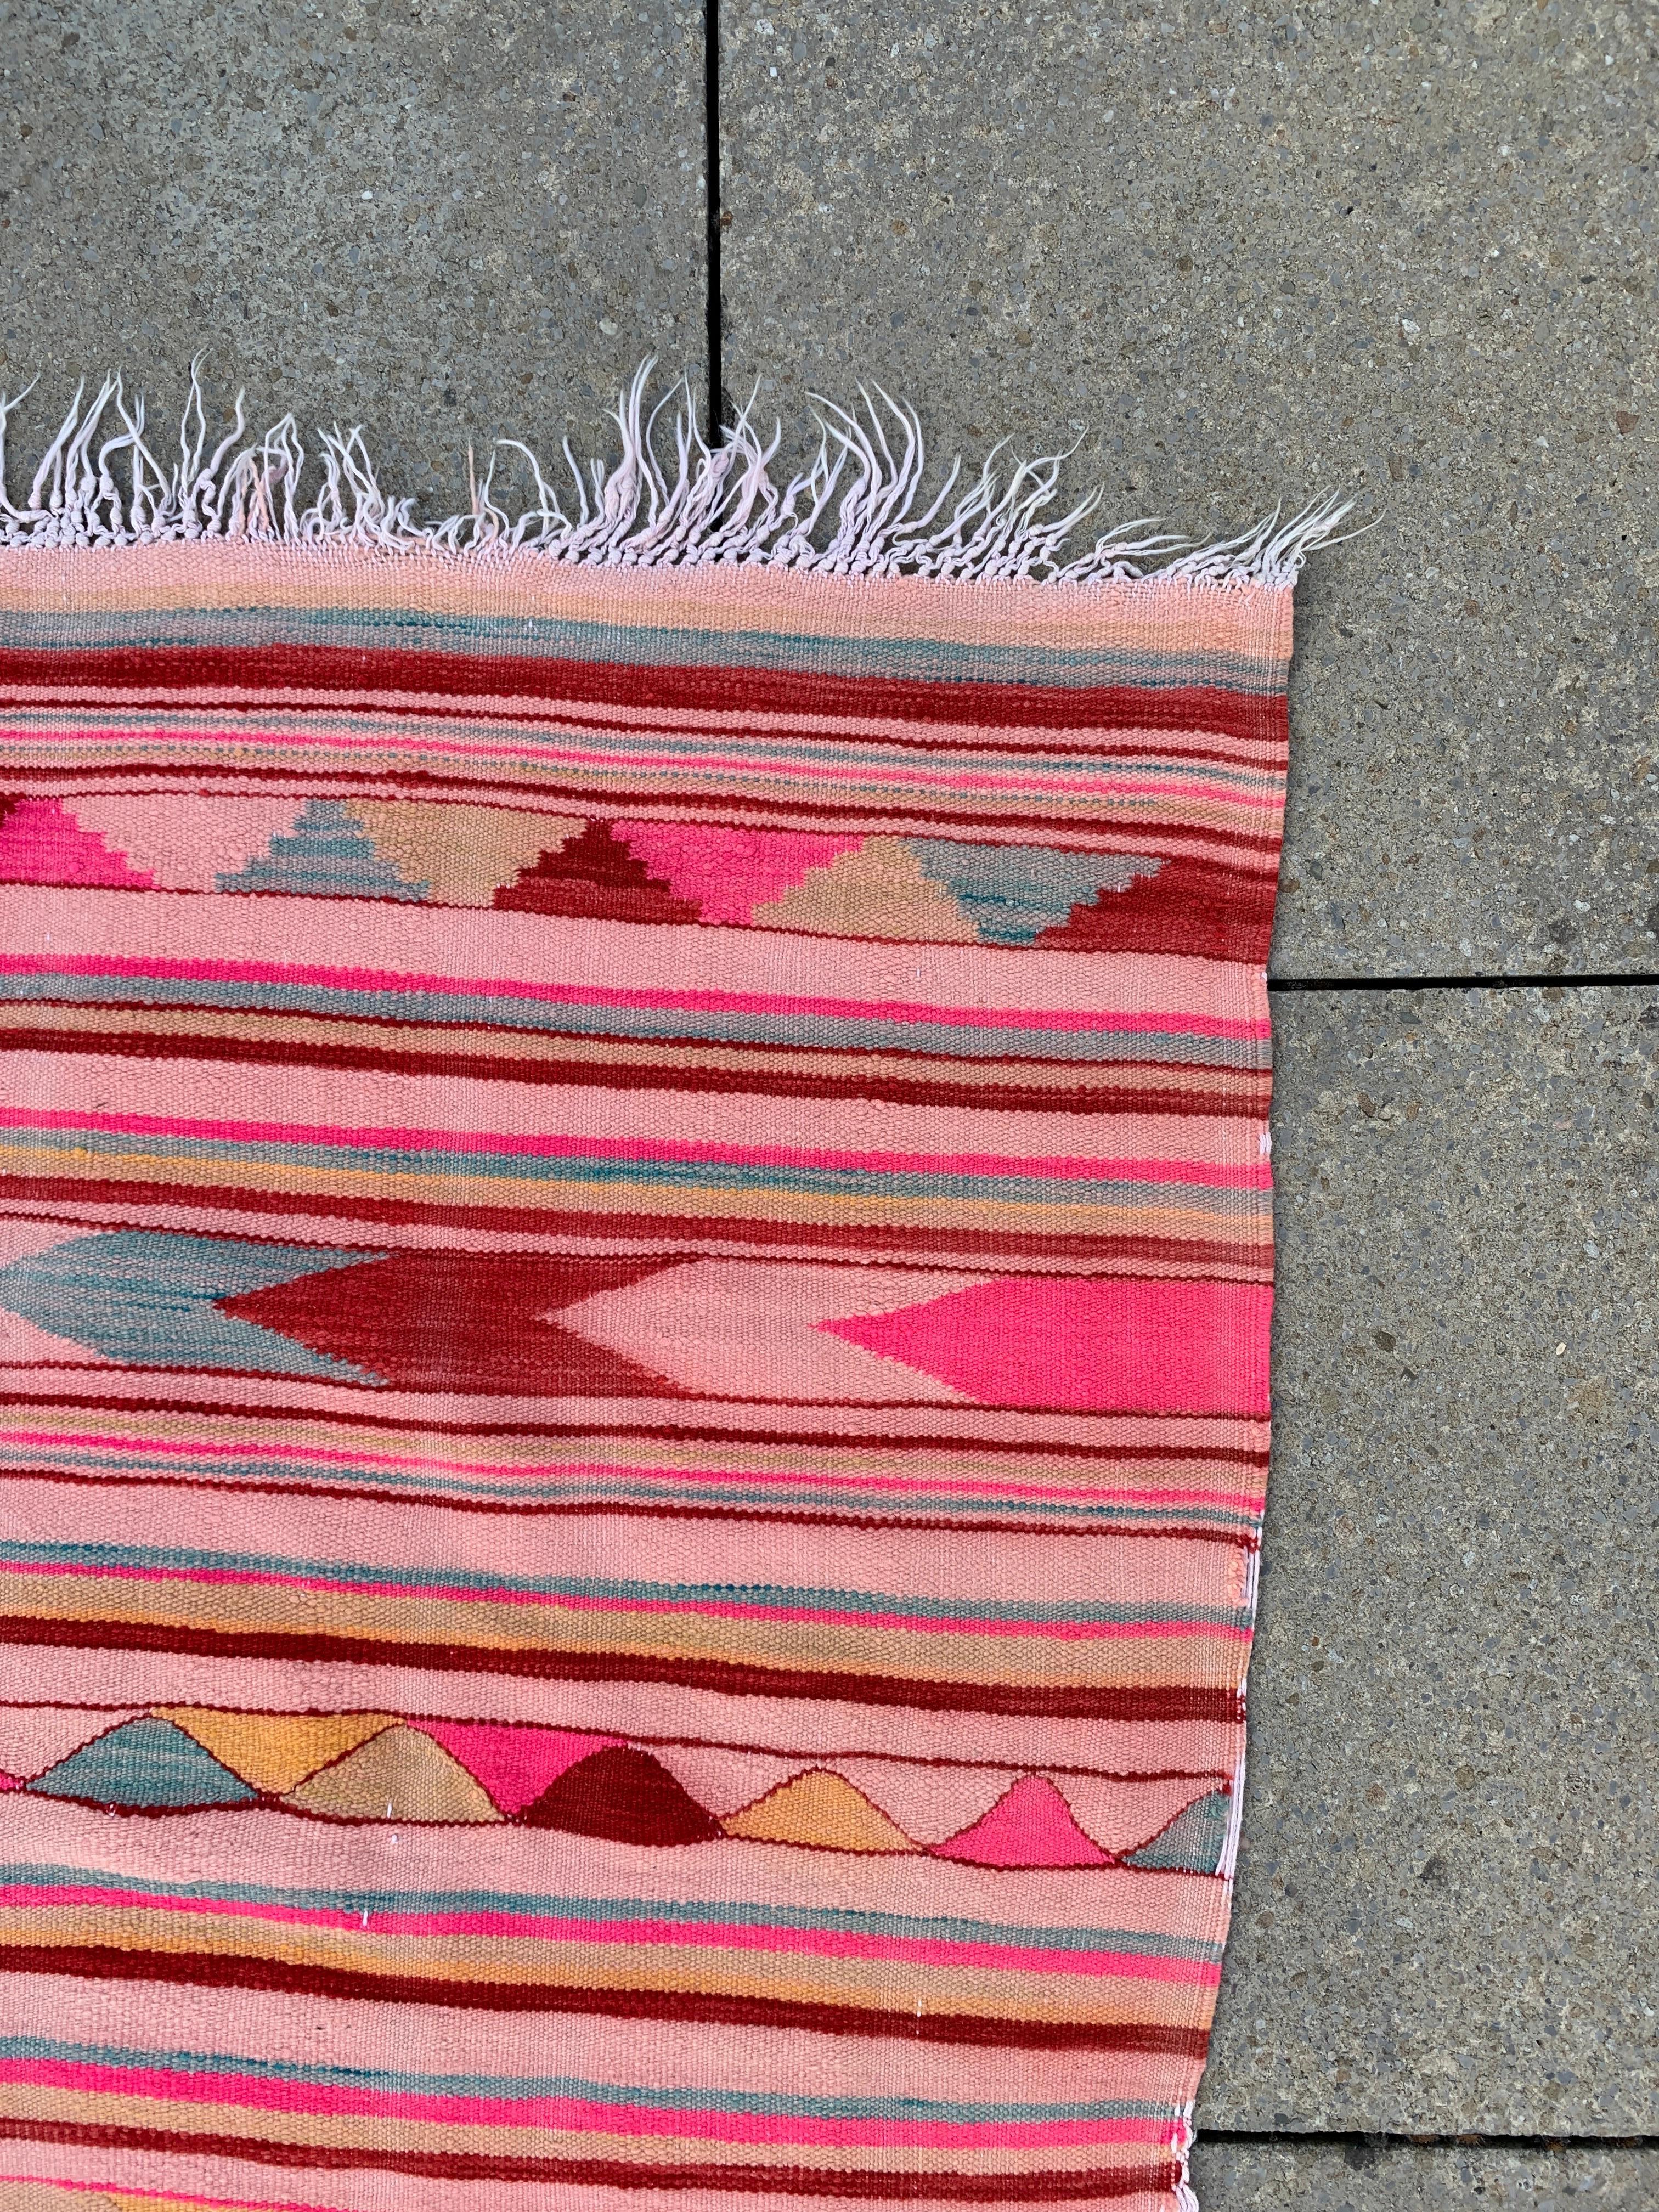 Large 1960s Pink Stripped Rug Handmade Vintage Algerian Geometrical 162x369cm In Good Condition For Sale In London, GB